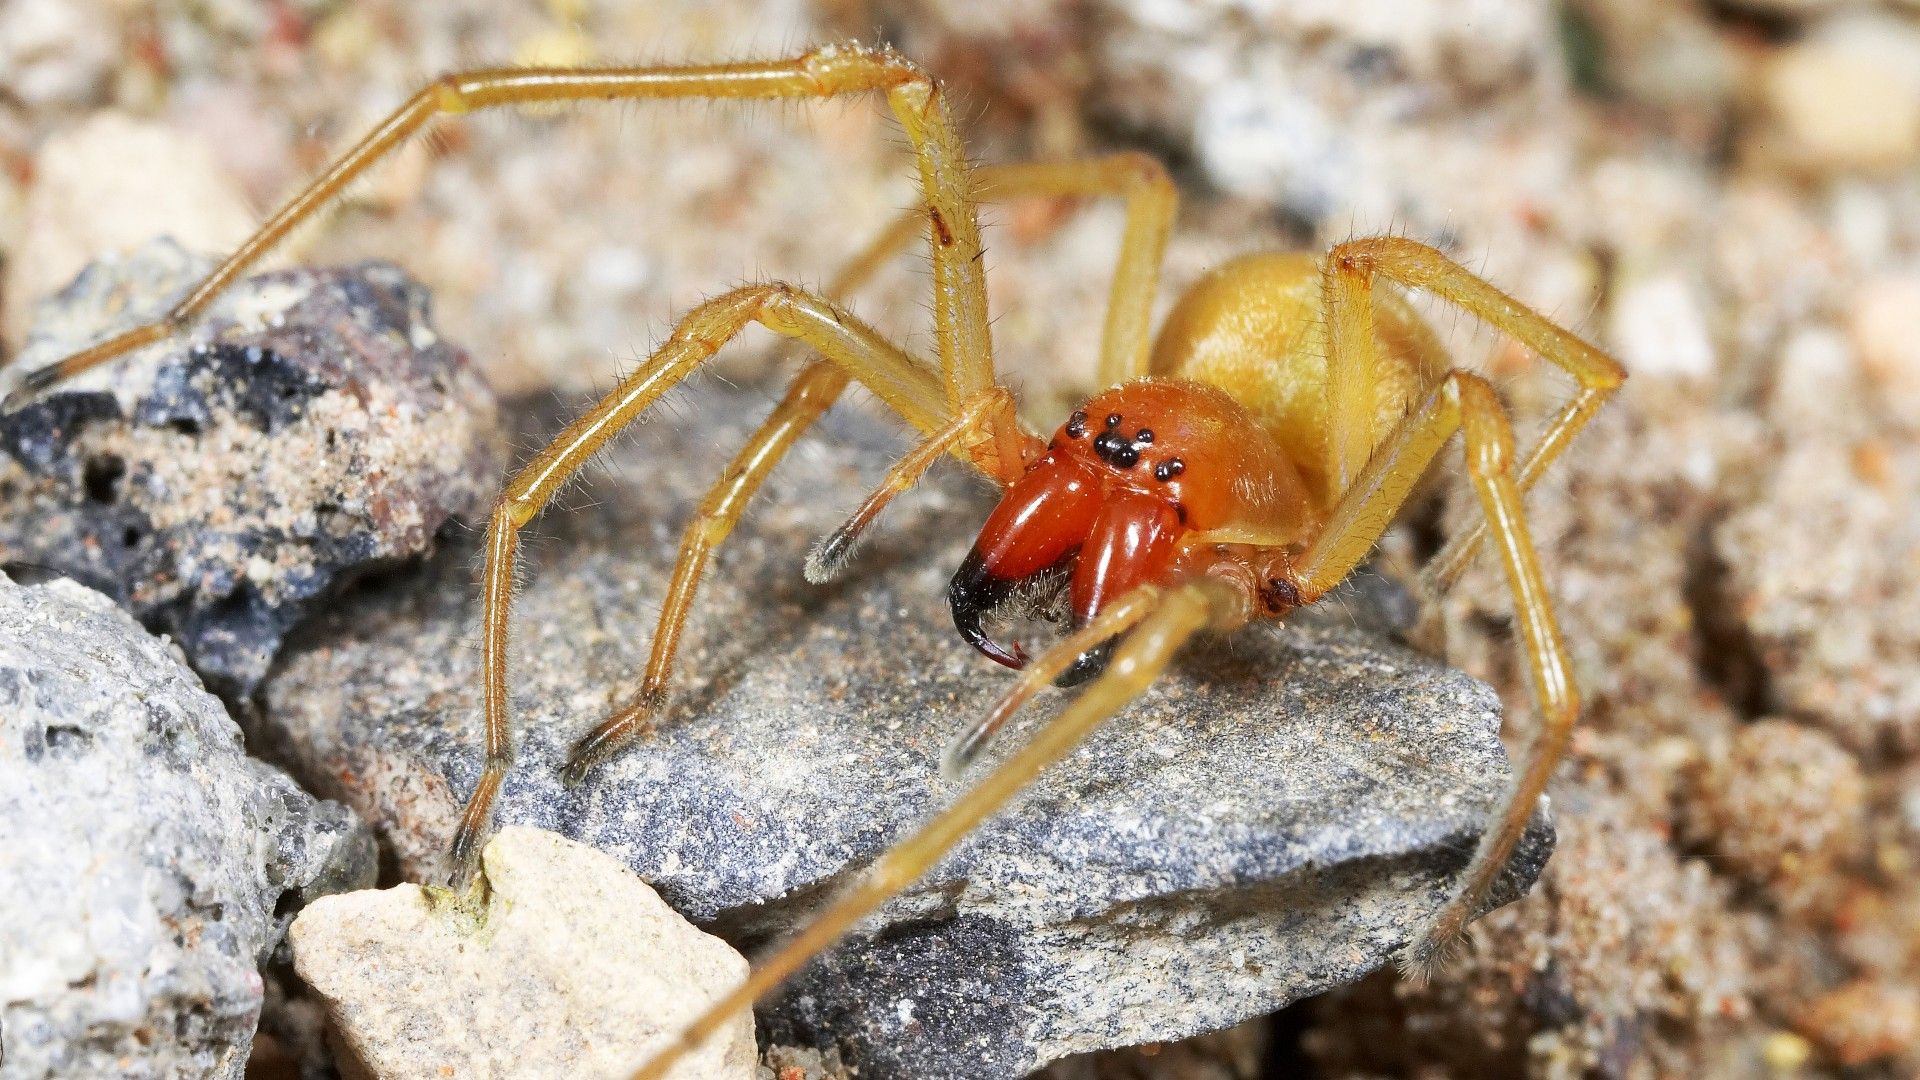 <p>                     The yellow sac spiders (<em>Cheiracanthium)</em> are in the family <em>Cheiracanthiidae</em> and they probably account for more human bites that any other type of spider. These arachnids are distributed all over the globe, from America to Northern Europe, South Africa to India, and even Australia and Japan. They’re nocturnal predators and during the day they hide in small white web cocoons.                   </p>                                      <p>                     Mildly venomous to humans, the yellow sac spider bite can be painful and sometimes misdiagnosed as brown recluse bites. Their venom can cause necrotic legions, as well as redness, swelling and sores around the bite site.                   </p>